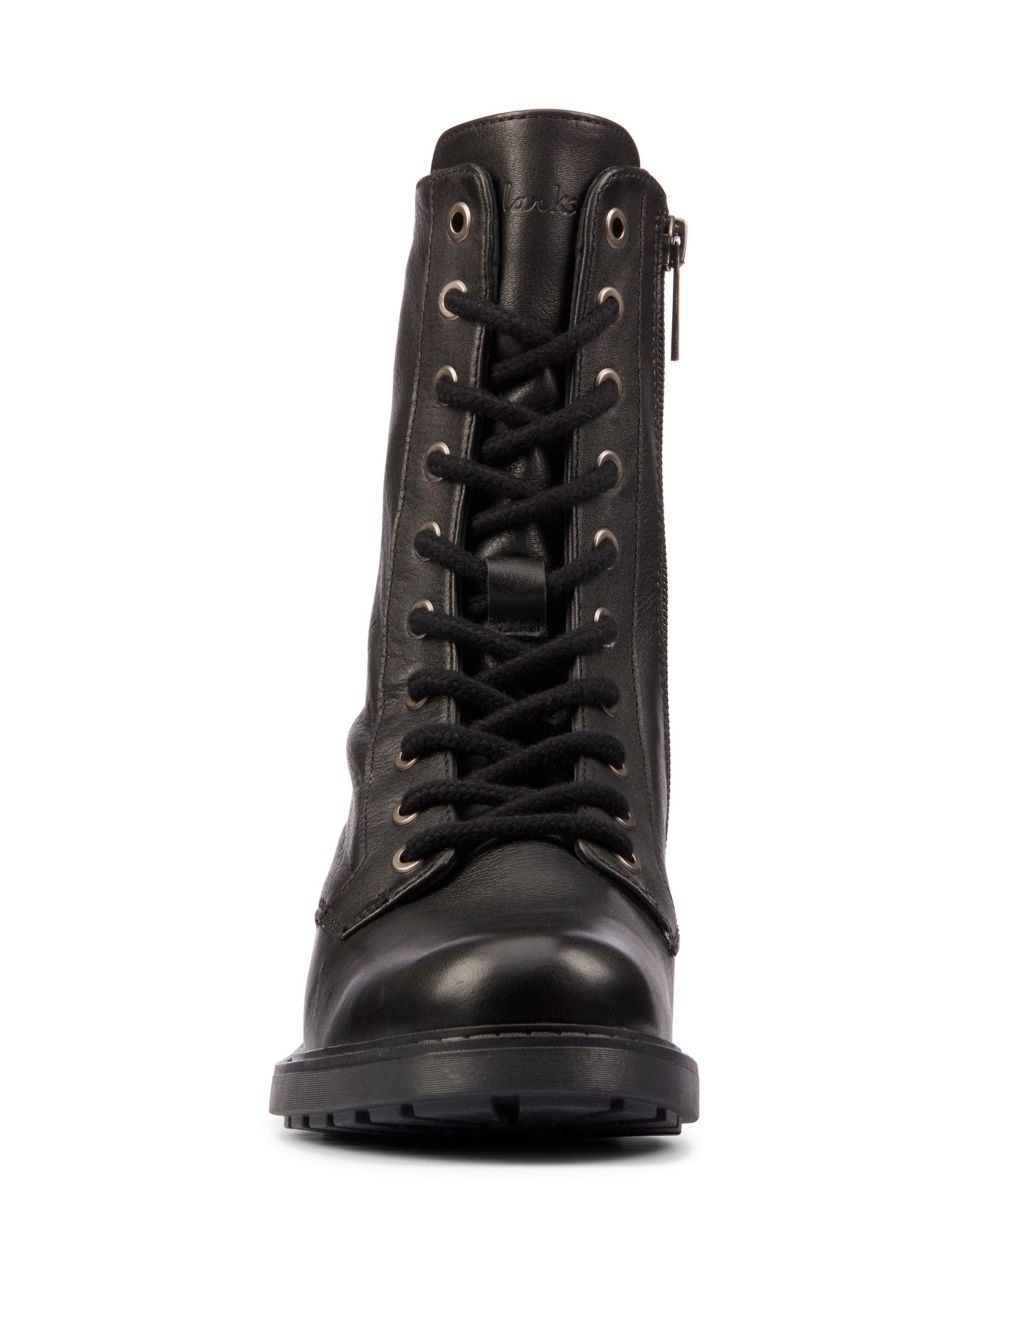 Wide Fit Leather Lace Up Block Heel Boots image 3